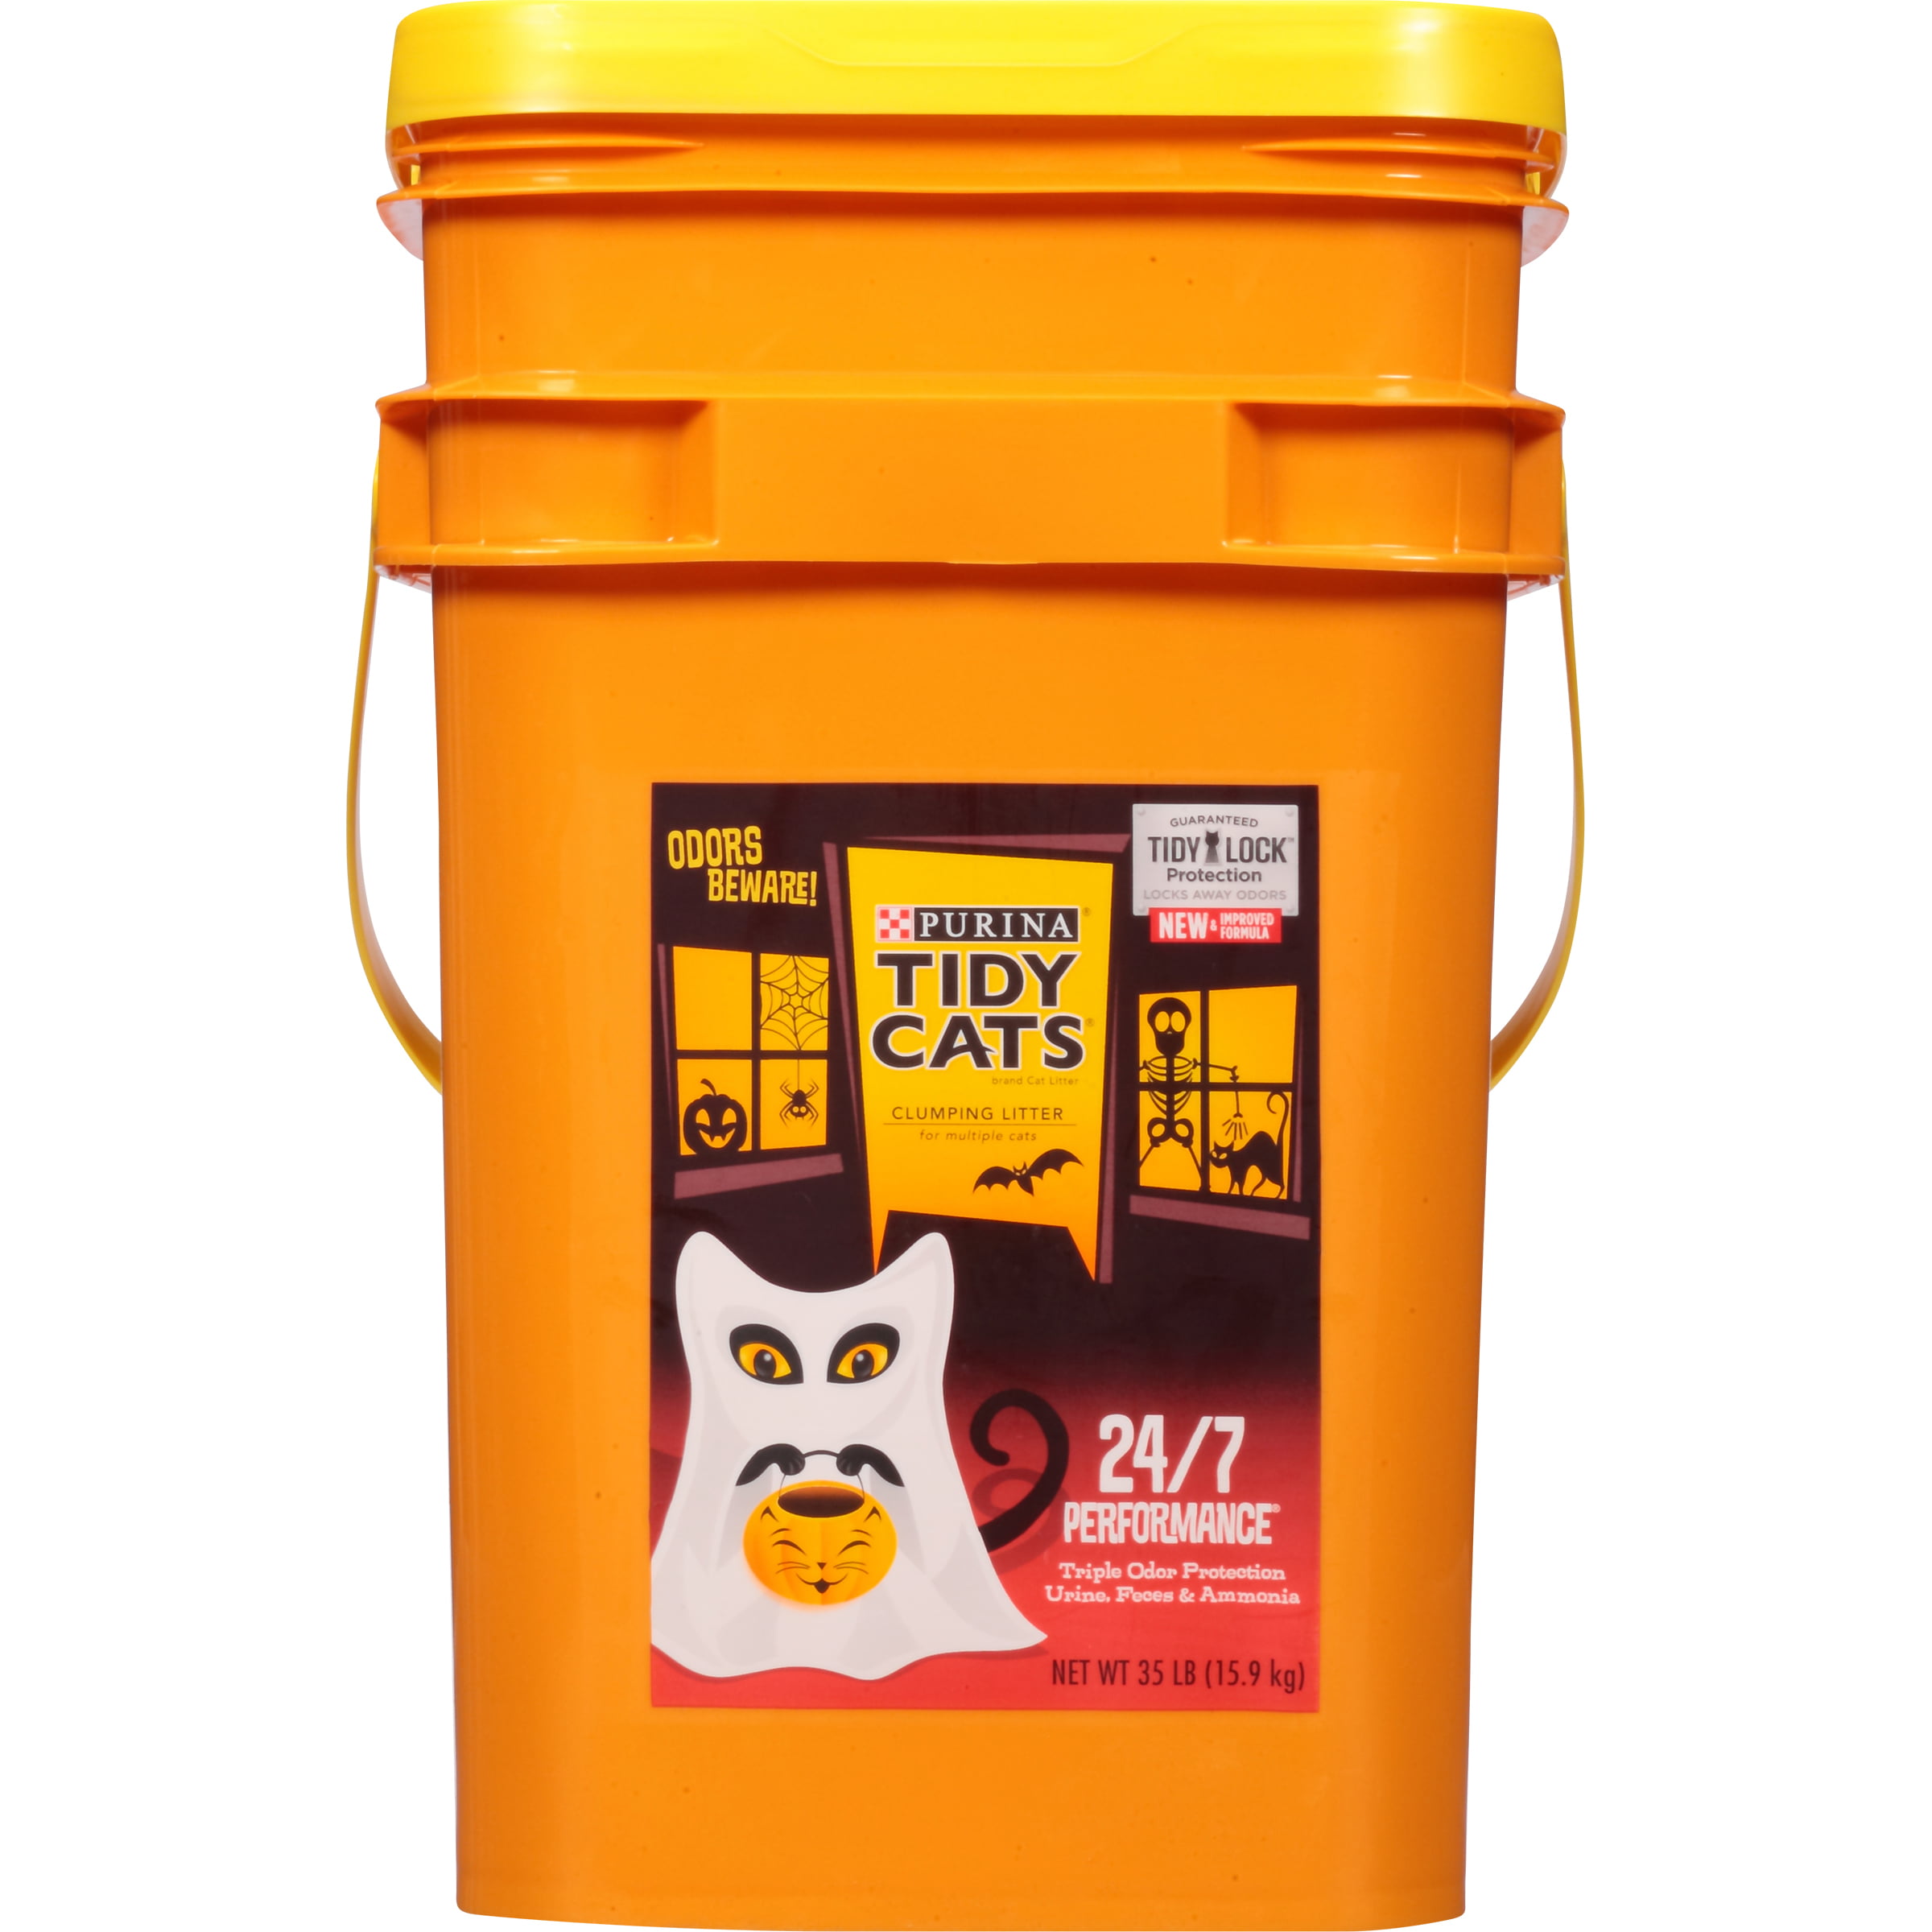 Tidy Cats Clumping Litter 24/7 Performance For Multiple Cats 35 Lb